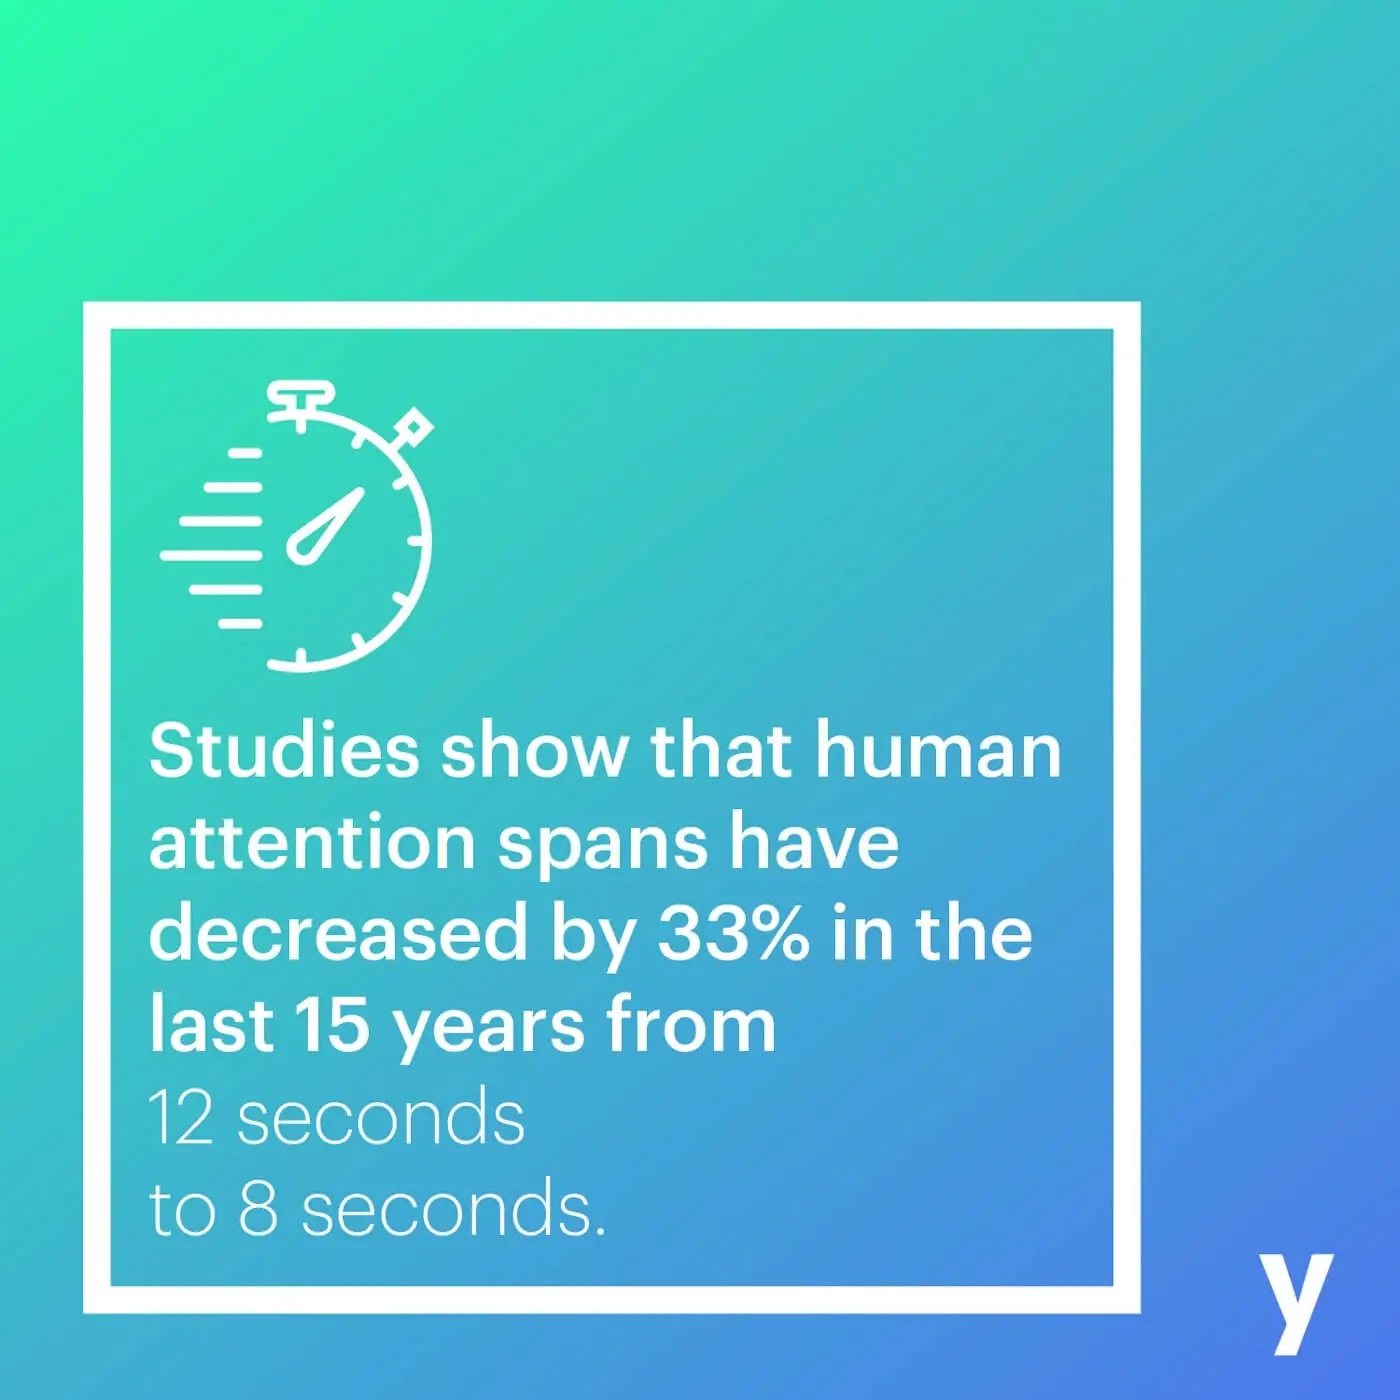 Studies show that human attention spans have decreased by 33% in the last 3 years.